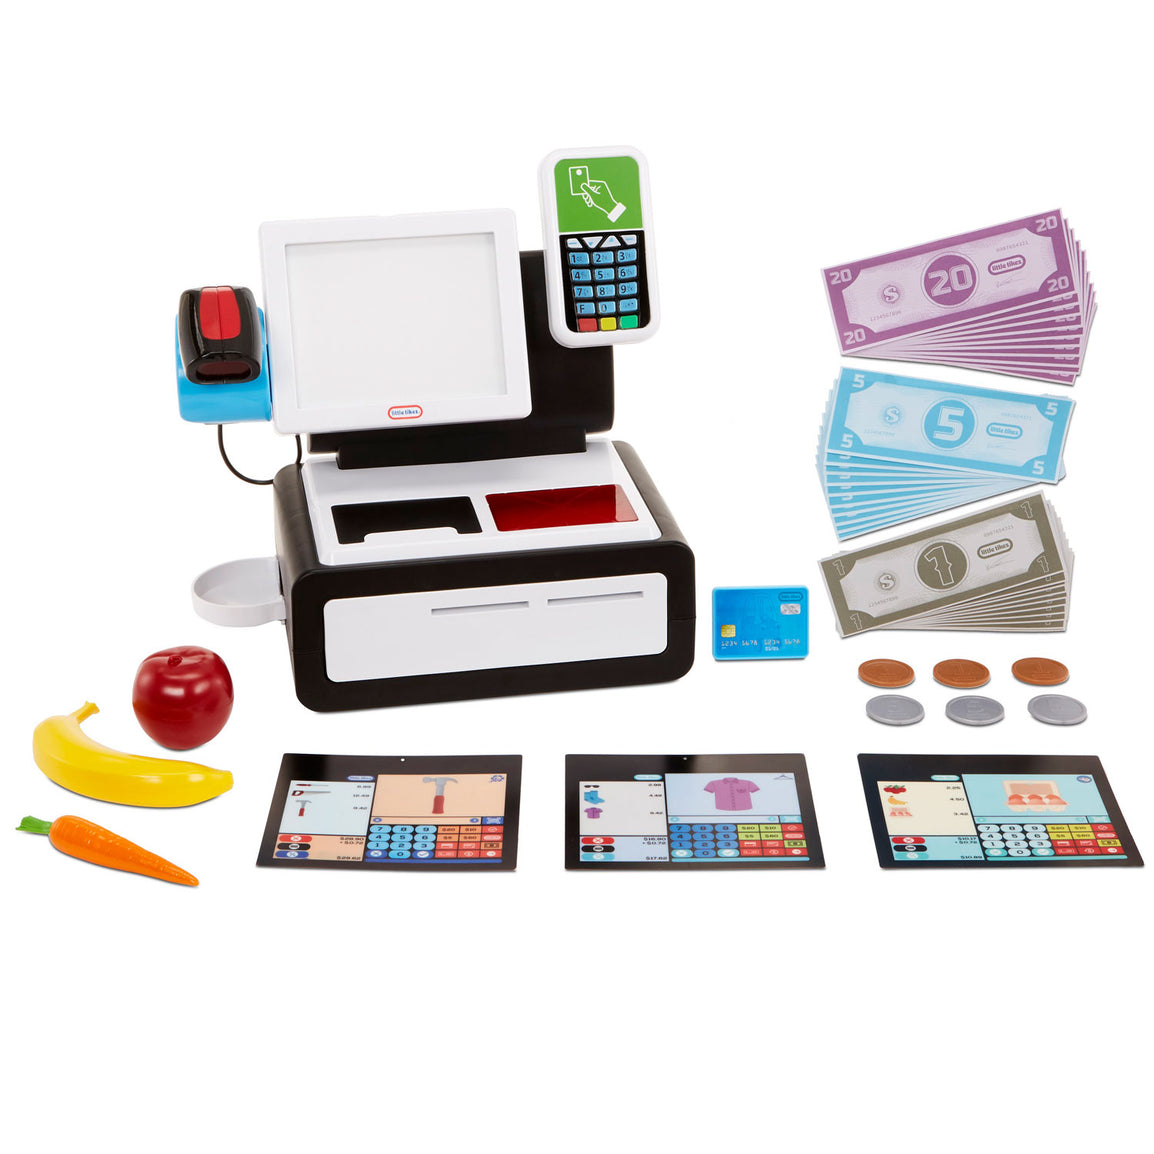 Includes 40+ realistic shopping accessories: 30 bills, 6 coins, 3 checkout screens, hand scanner, debit card, apple, banana, and carro